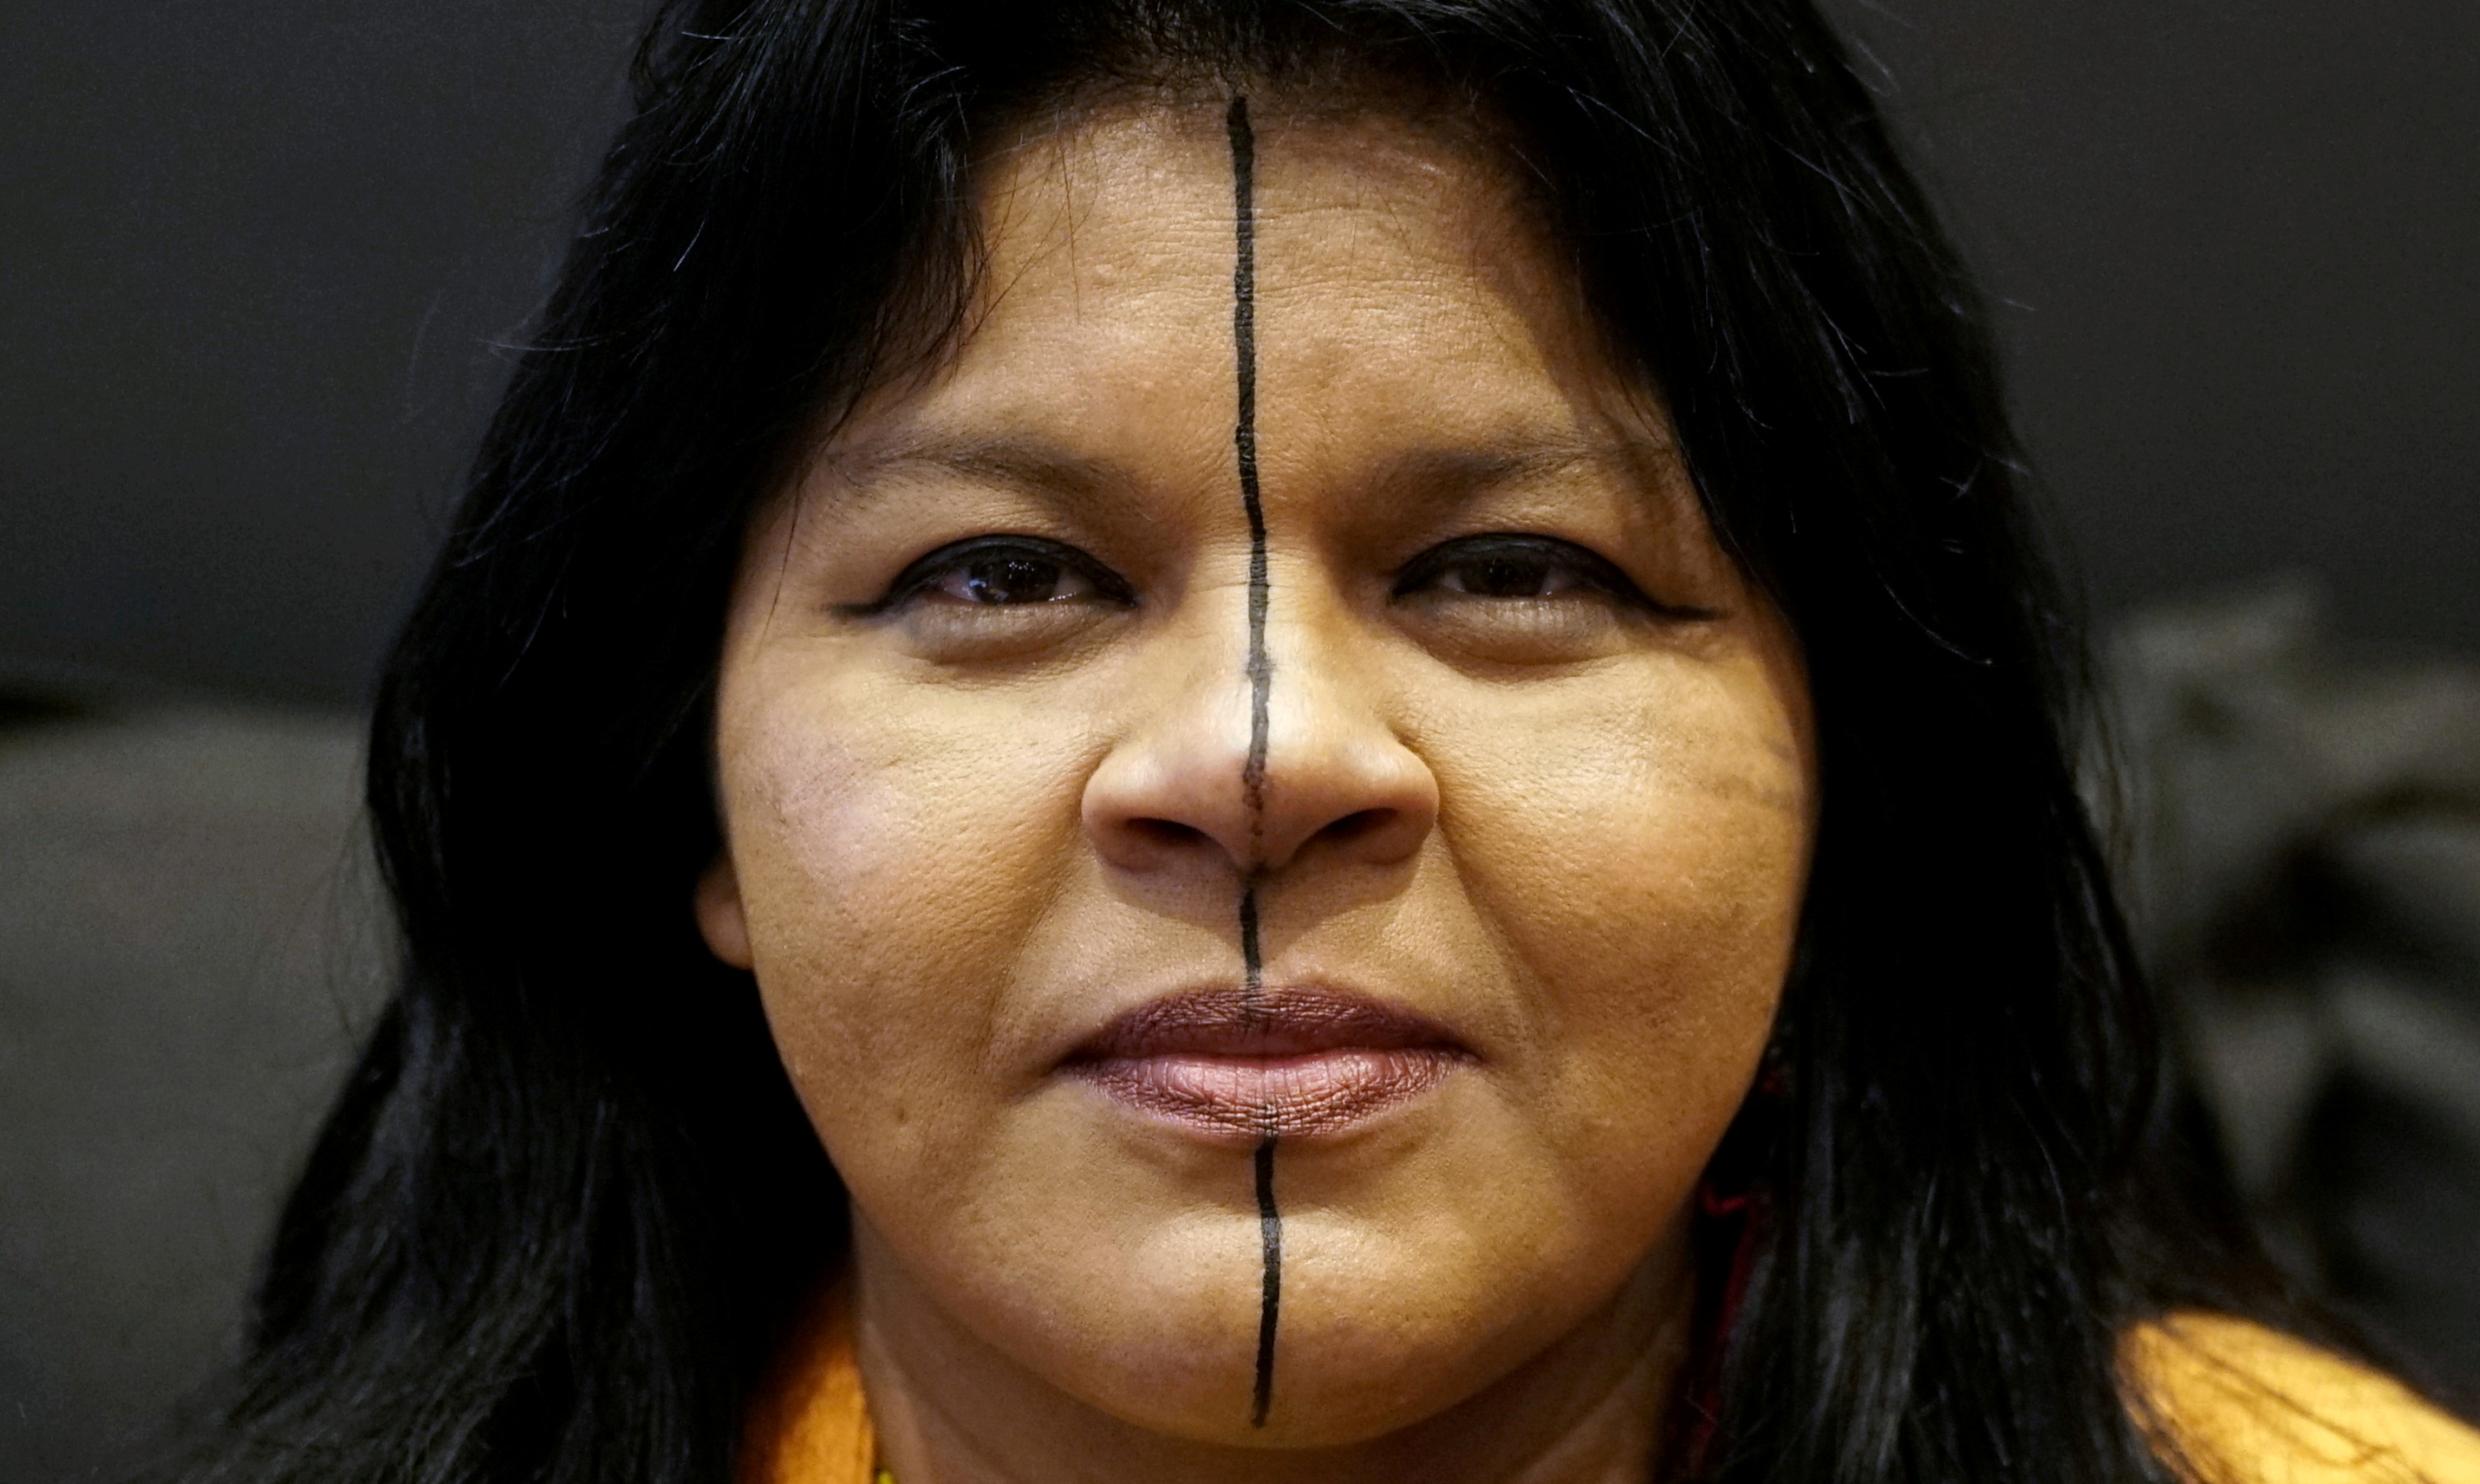 Indigenous Leader Sonia Guajajara of the Guajajara tribe is seen during an interview with Reuters during her European tour in Paris